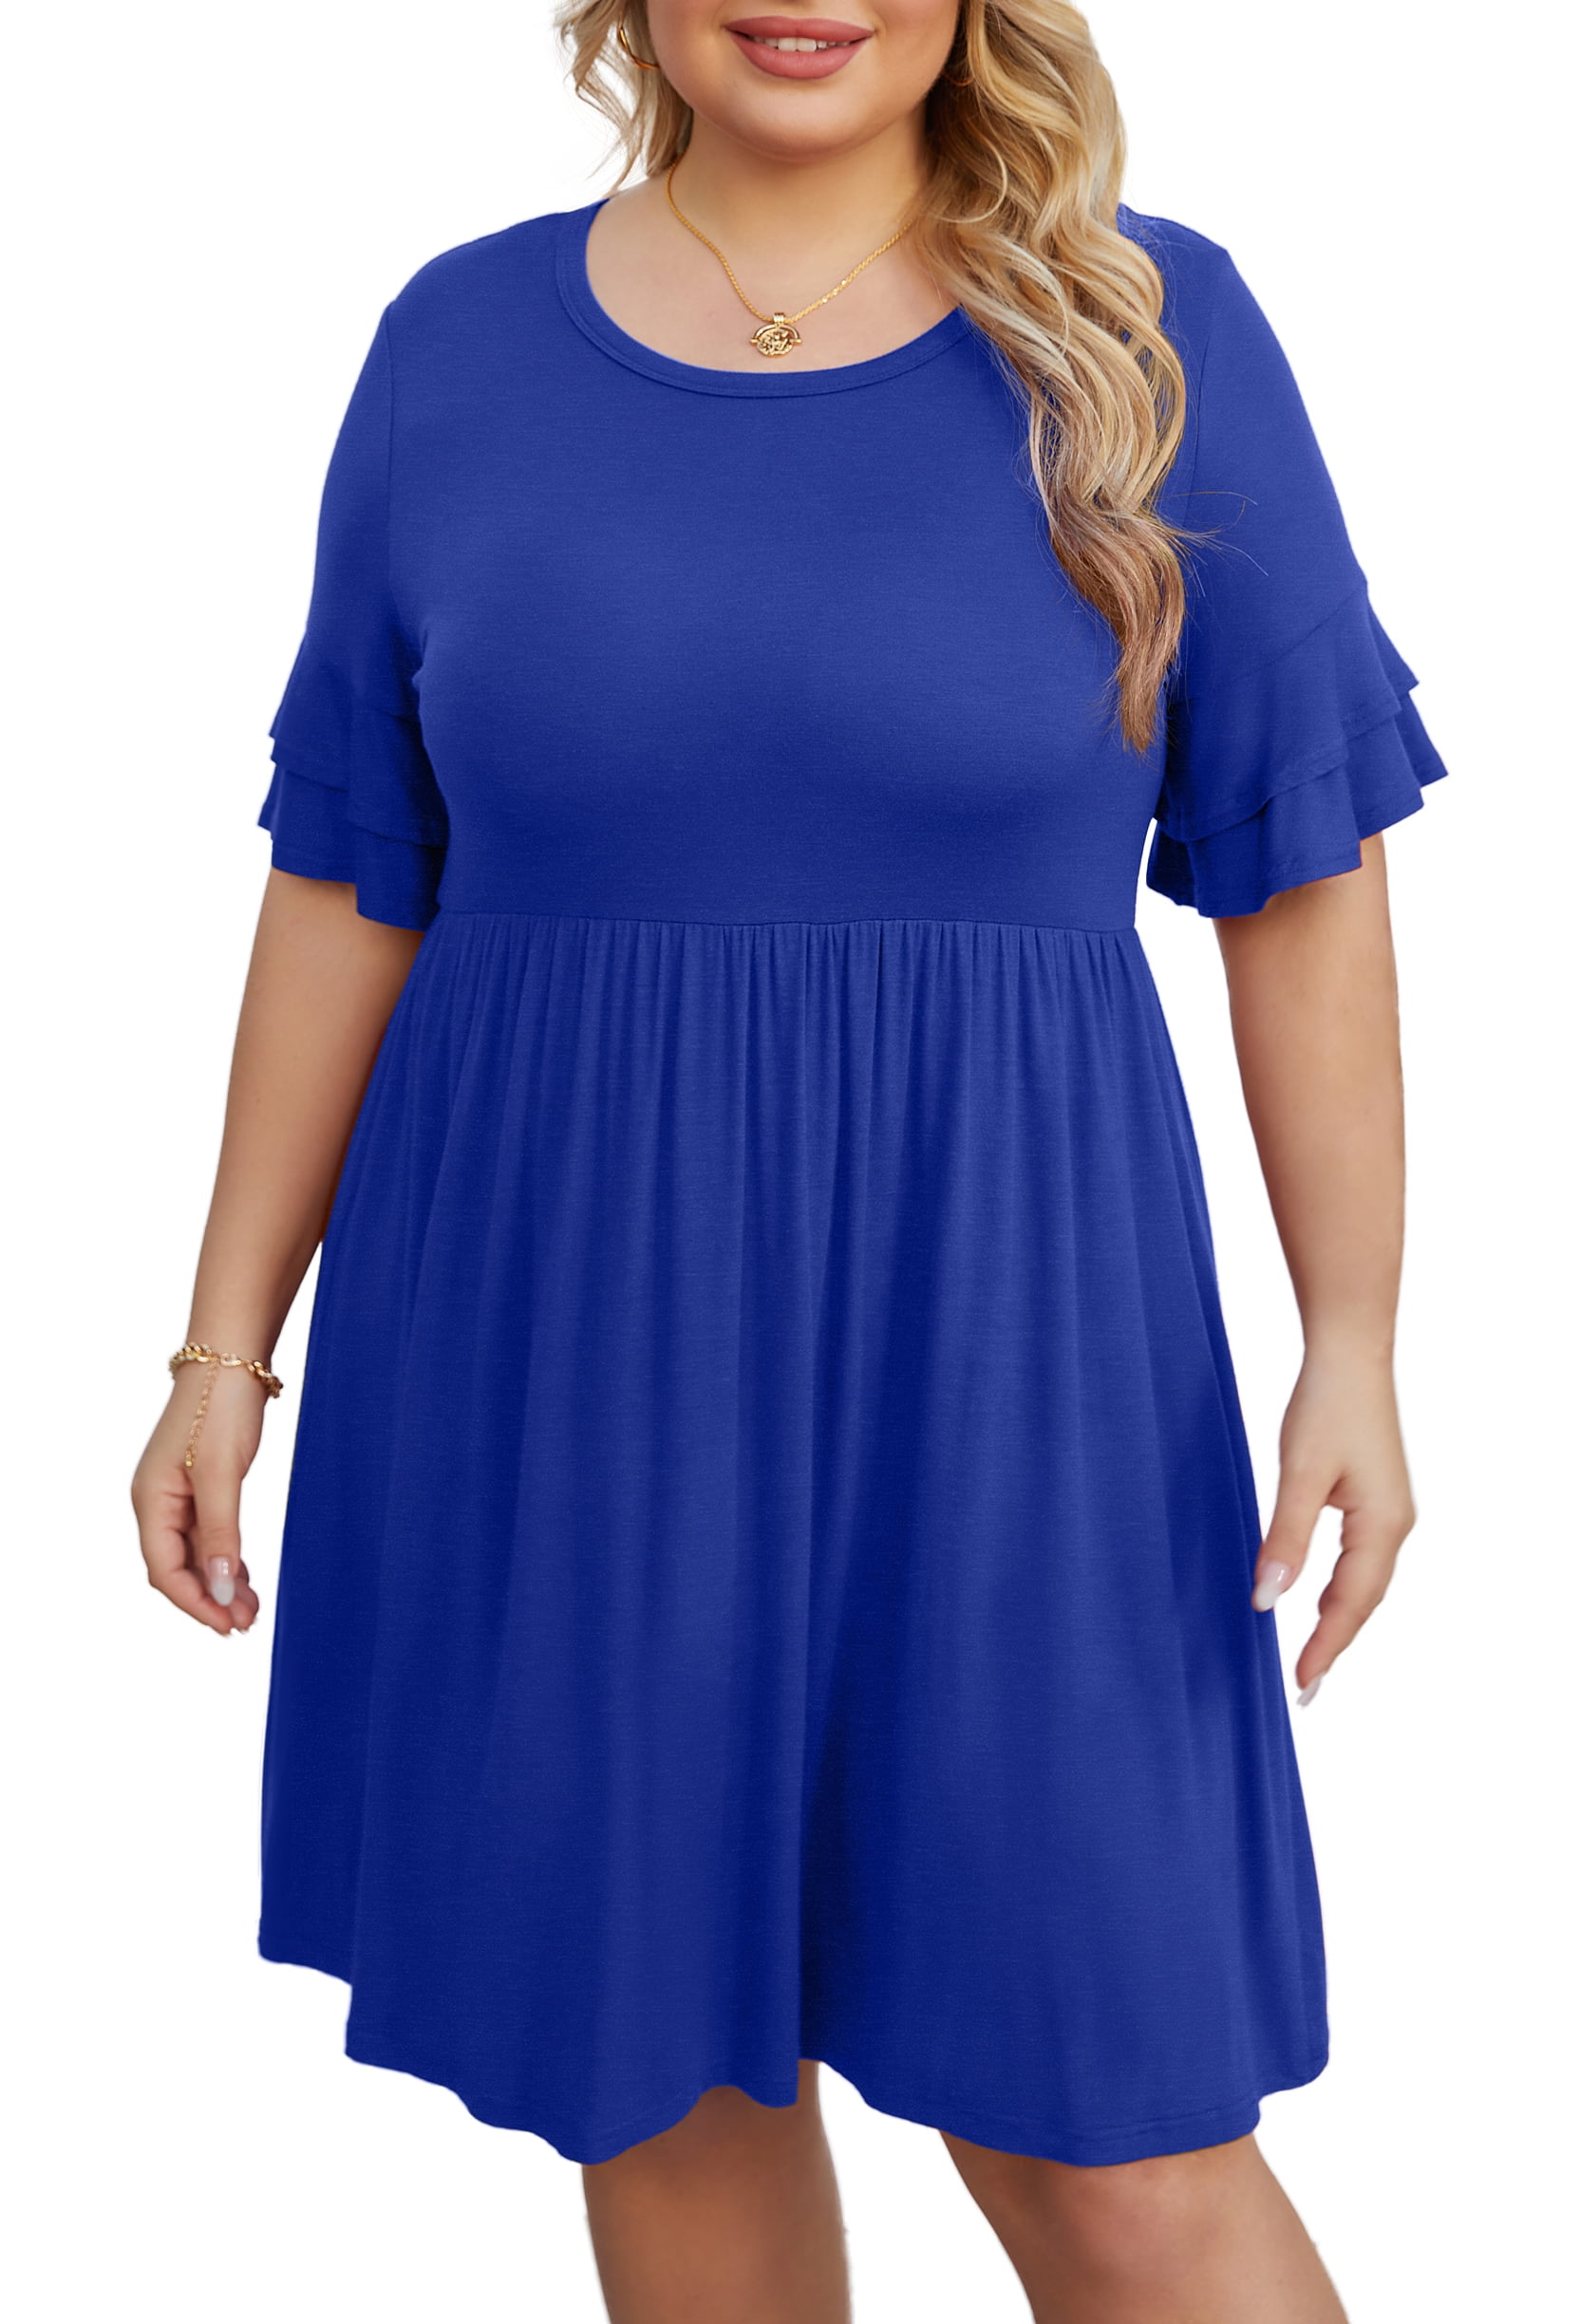 Cueply Plus Size Dress for Women Summer 2023 Double Ruffle Short Sleeve ...